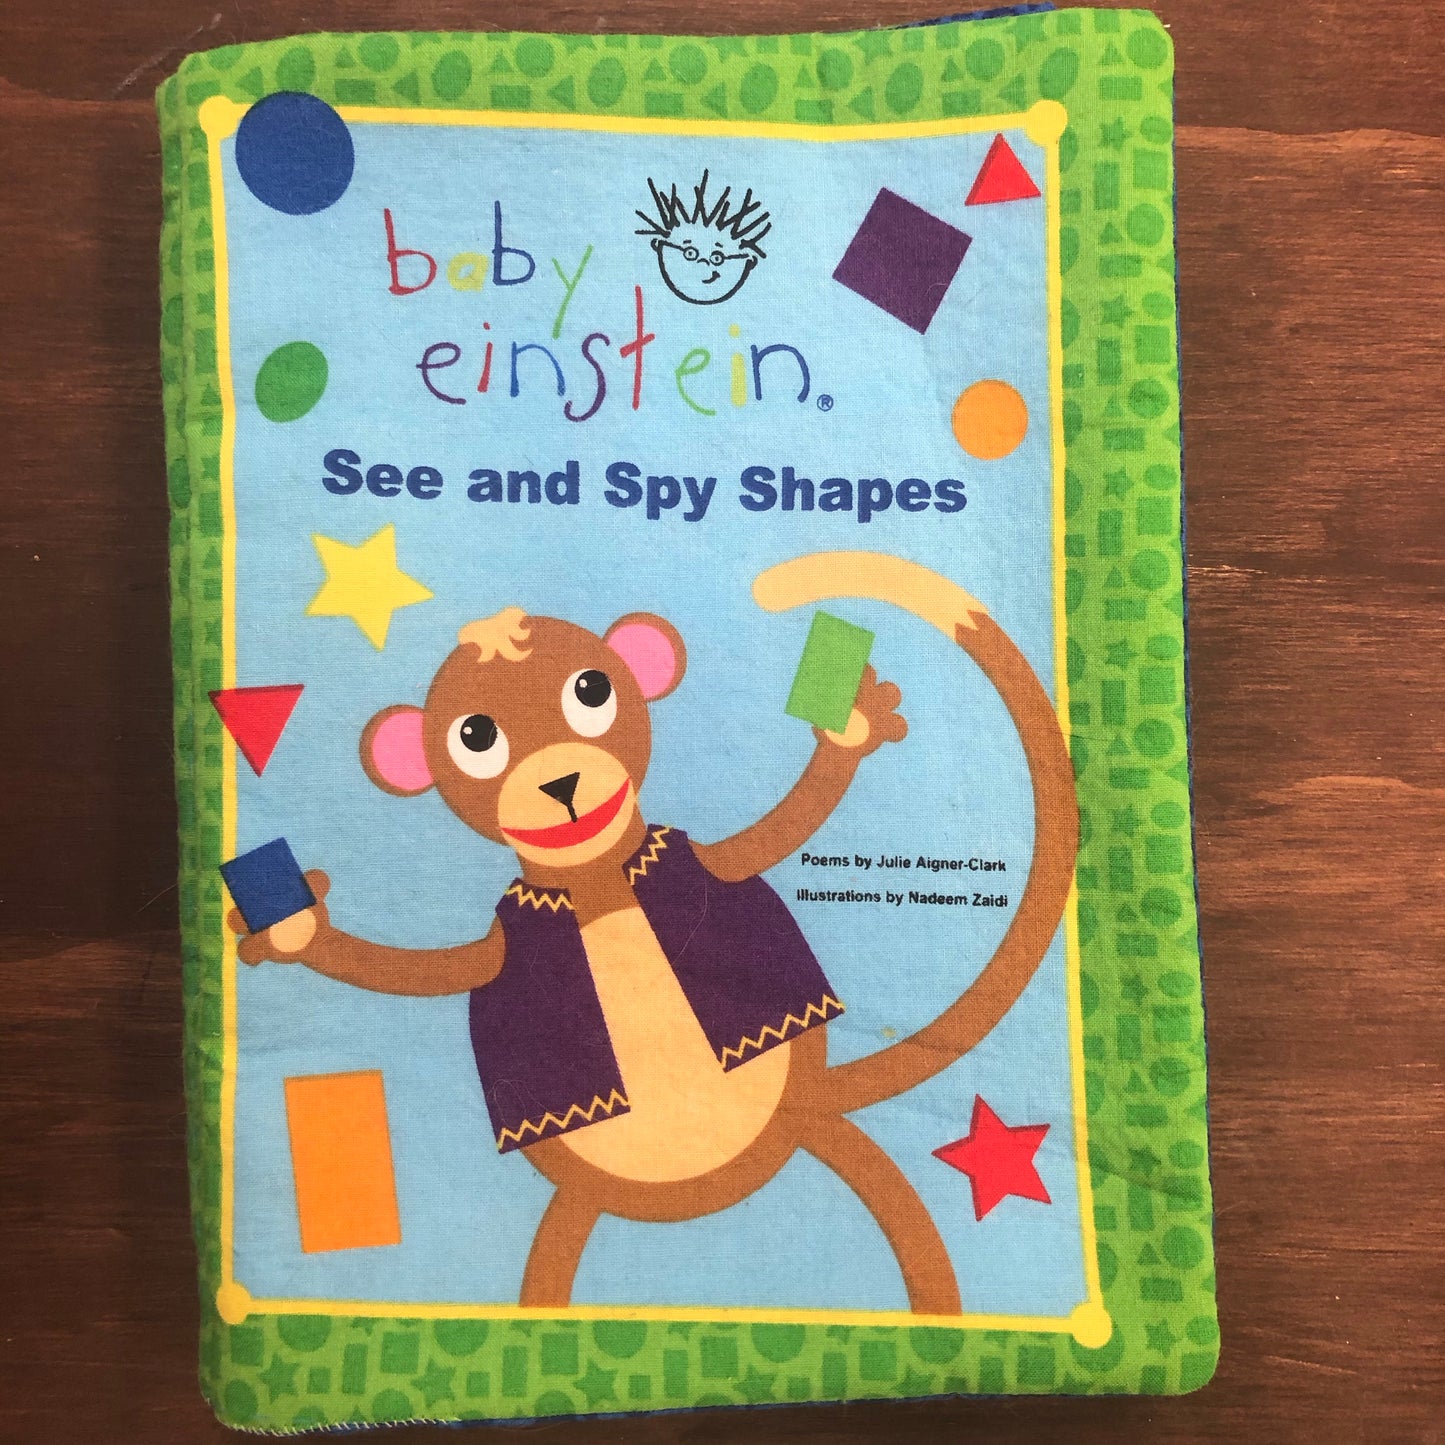 See and Spy Shapes